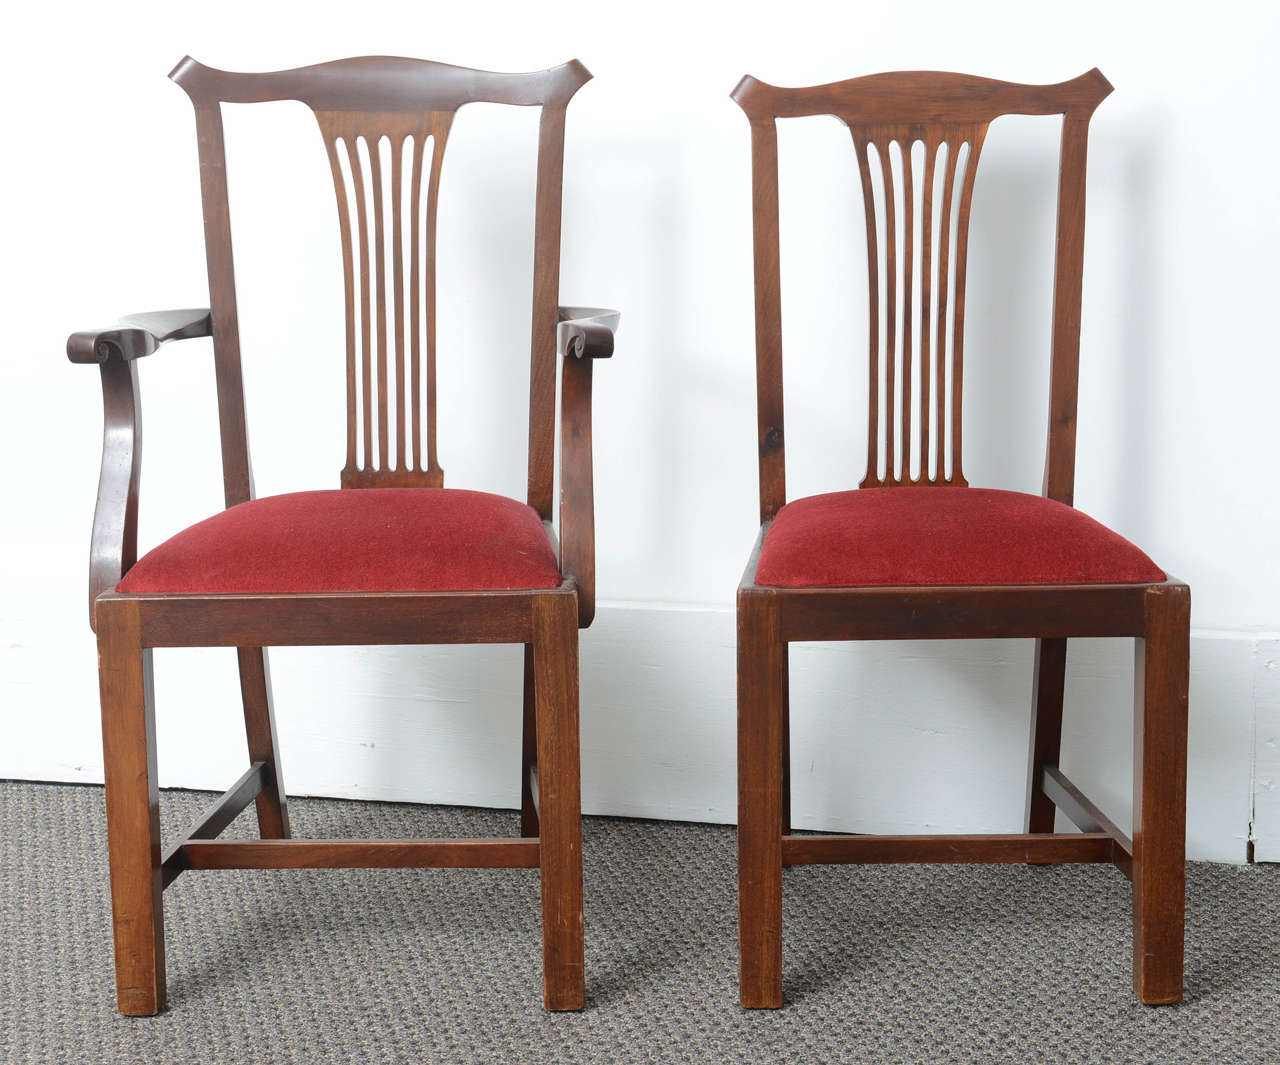 They are very nice set of eight dining chairs in mahogany made in England. They have a Hepplewhite style back and sit on square tapered legs. They have drop in seats which are recovered in red velvet and in good condition. To the legs they have